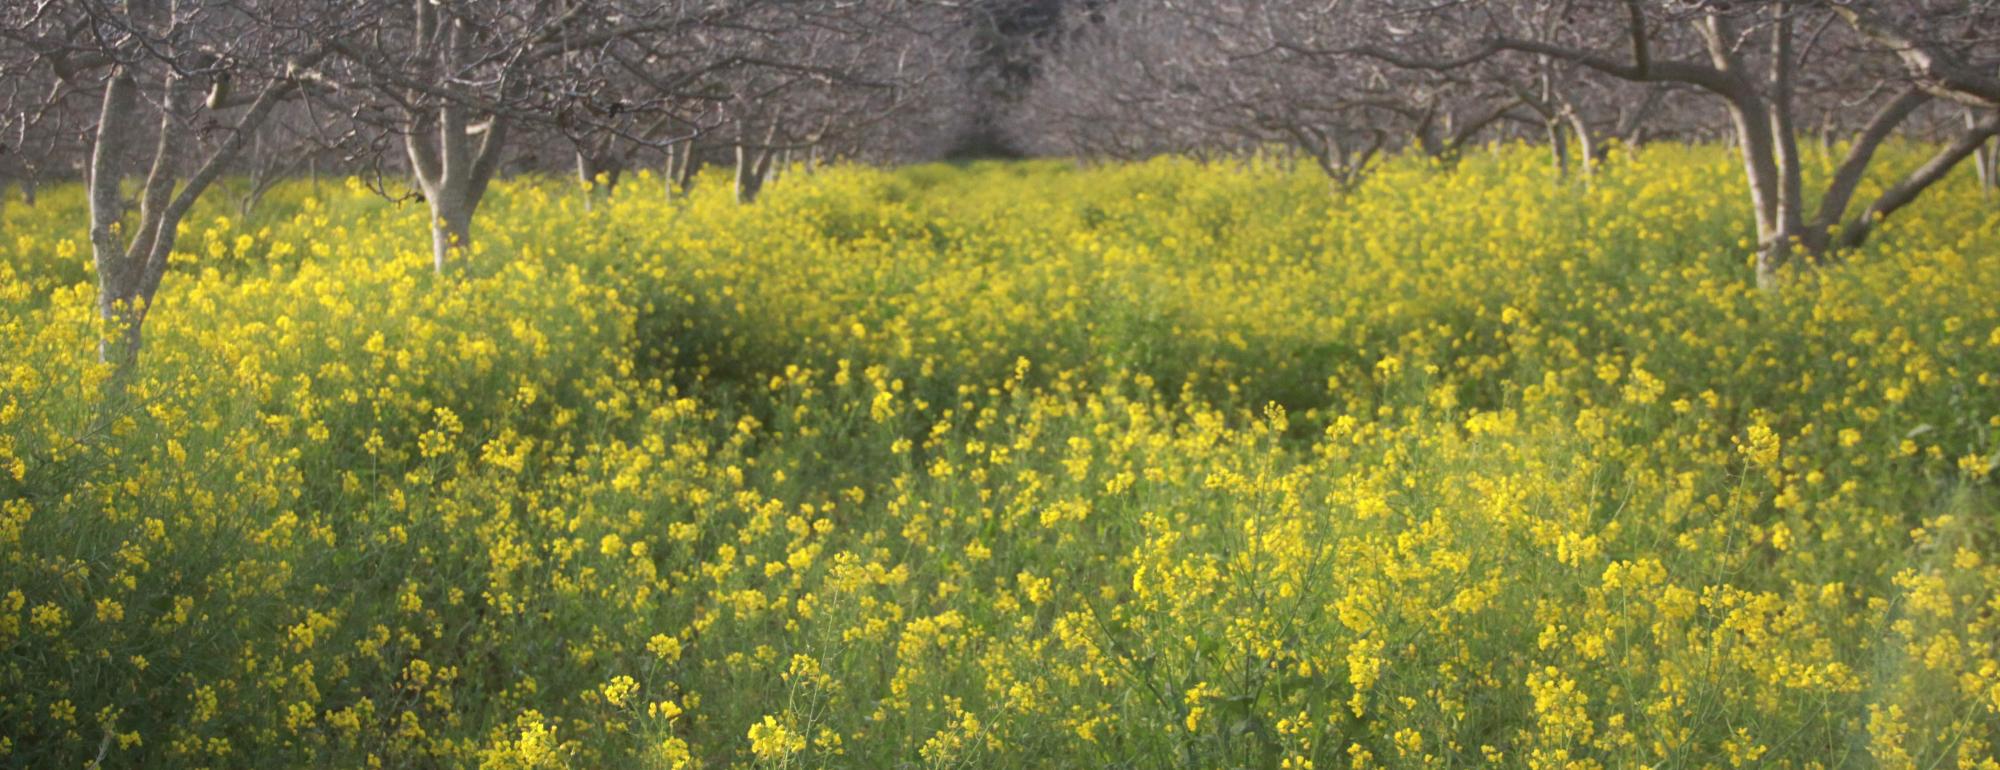 Walnut orchard planted with mustard